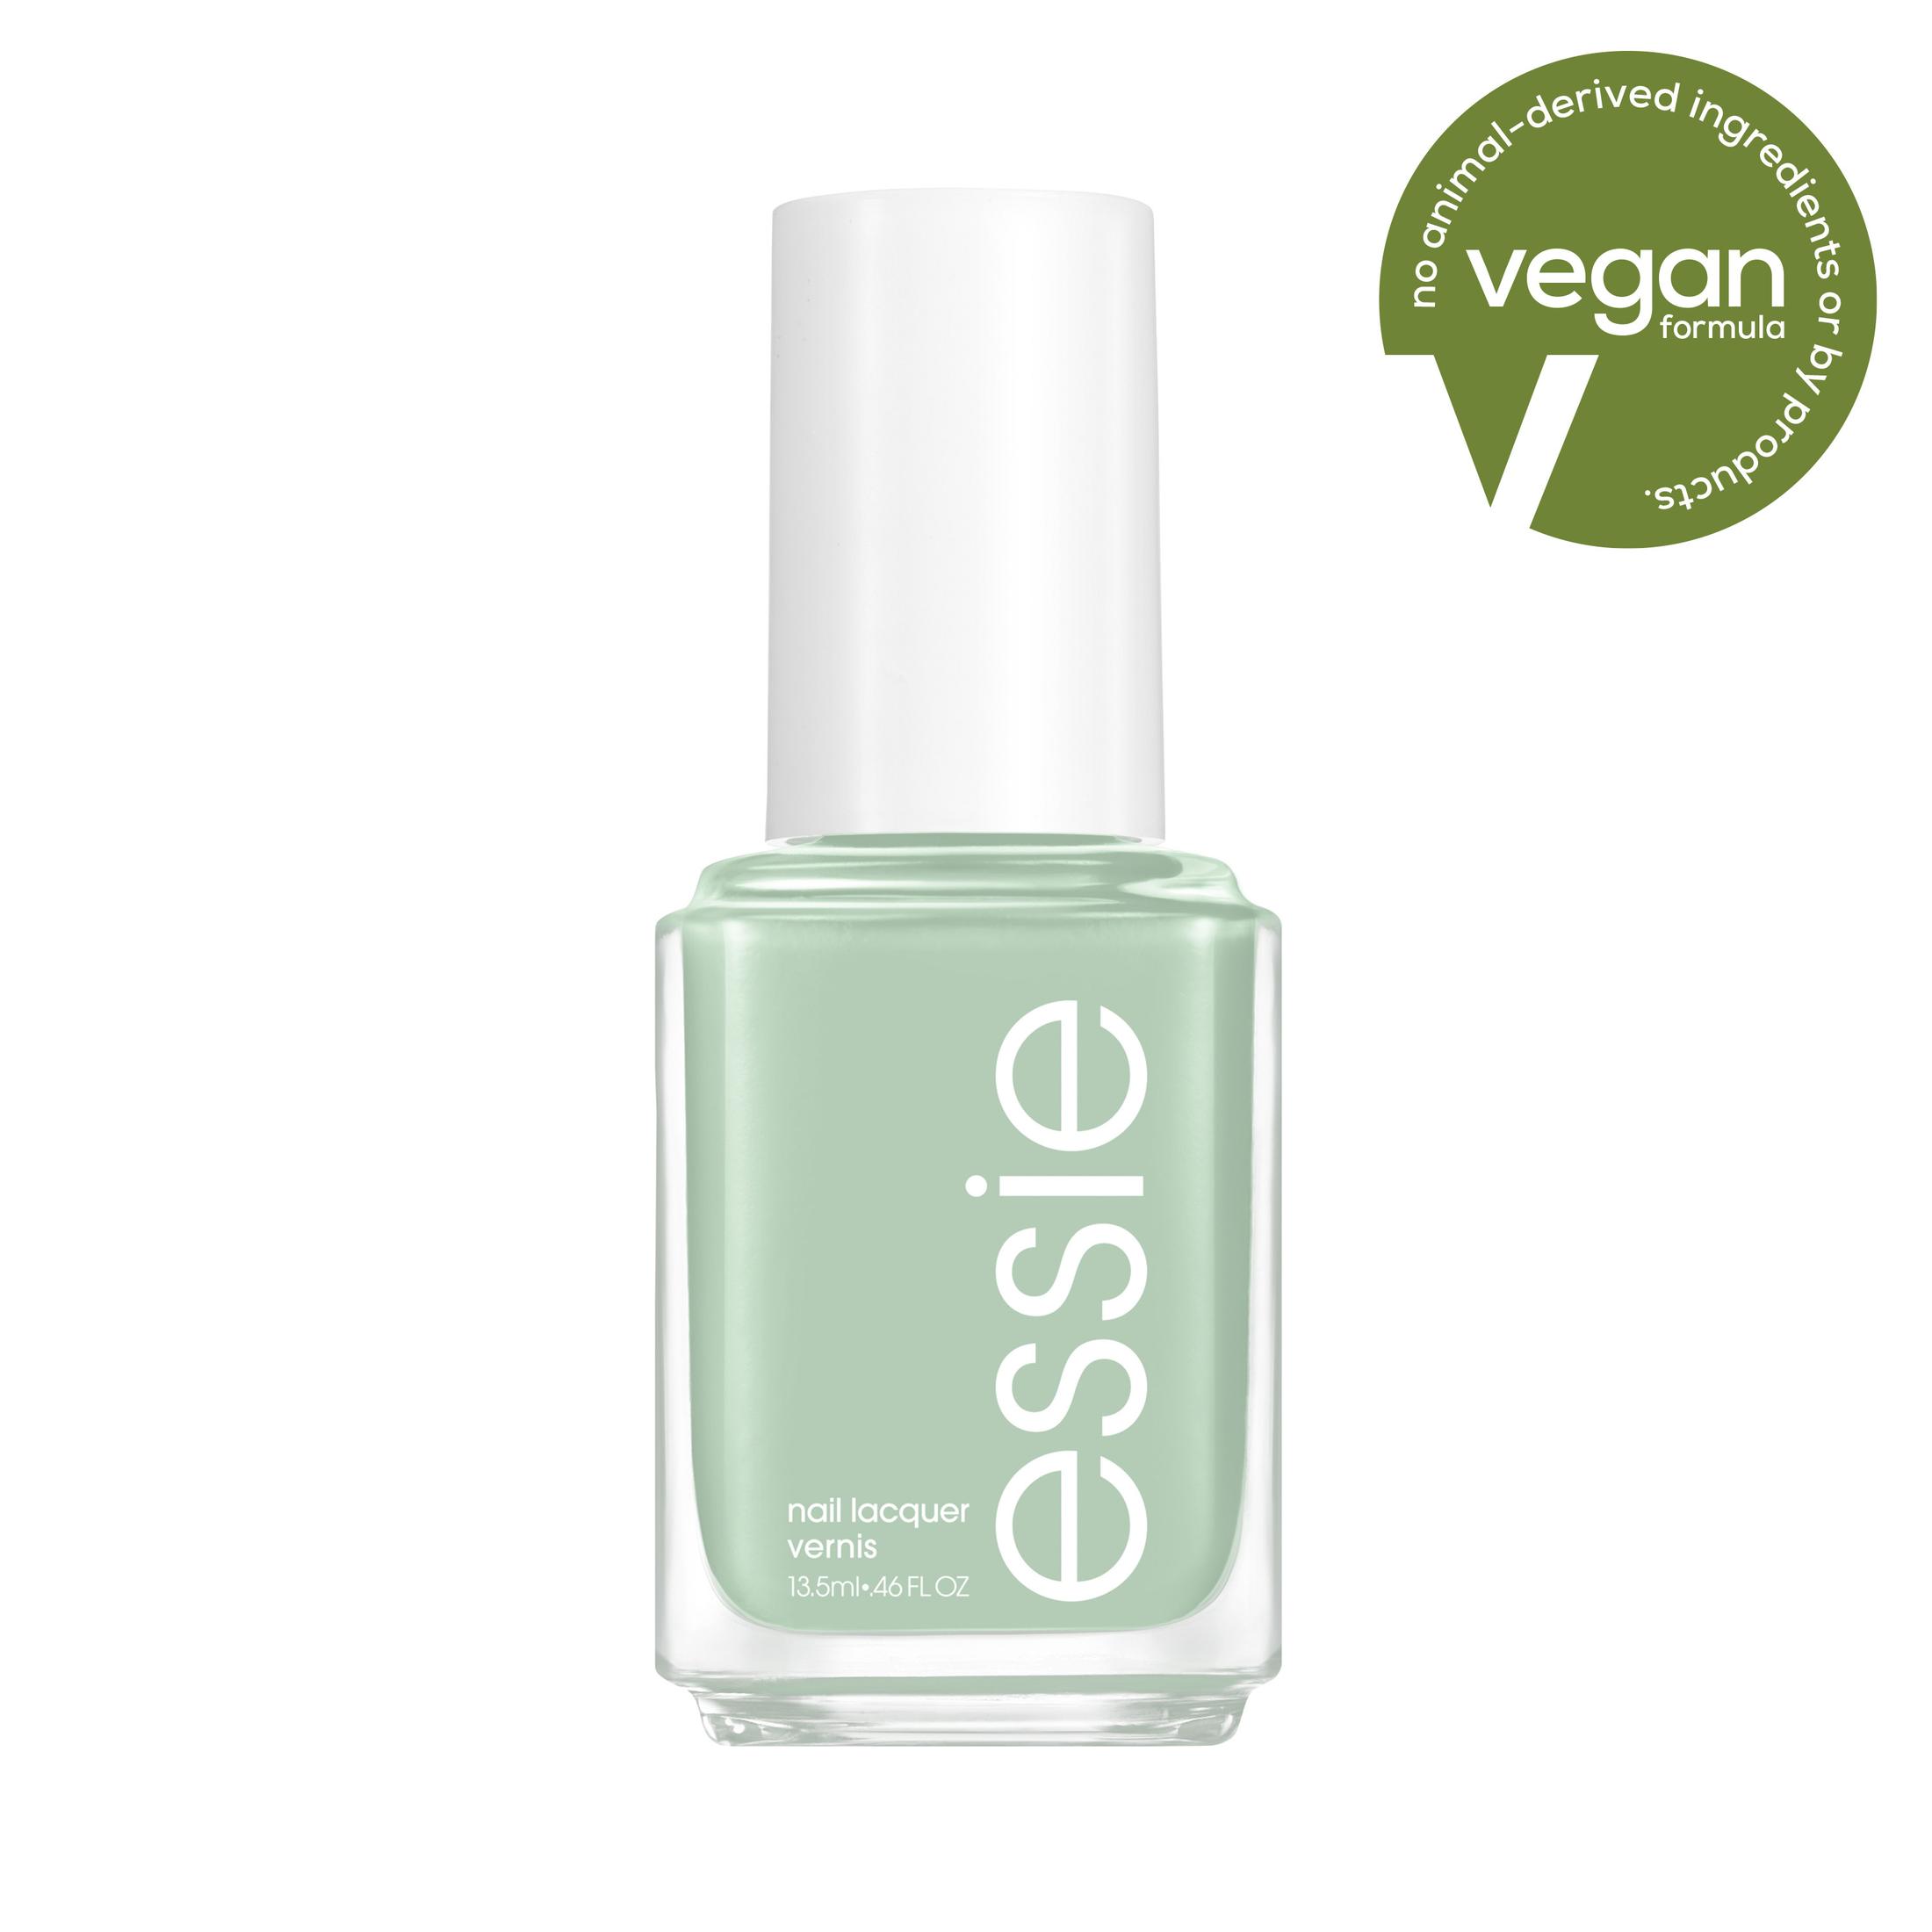 essie Salon Quality Nail Polish, Turquoise and Caicos, Muted Green, 0.46 fl. oz Bottle - image 1 of 13